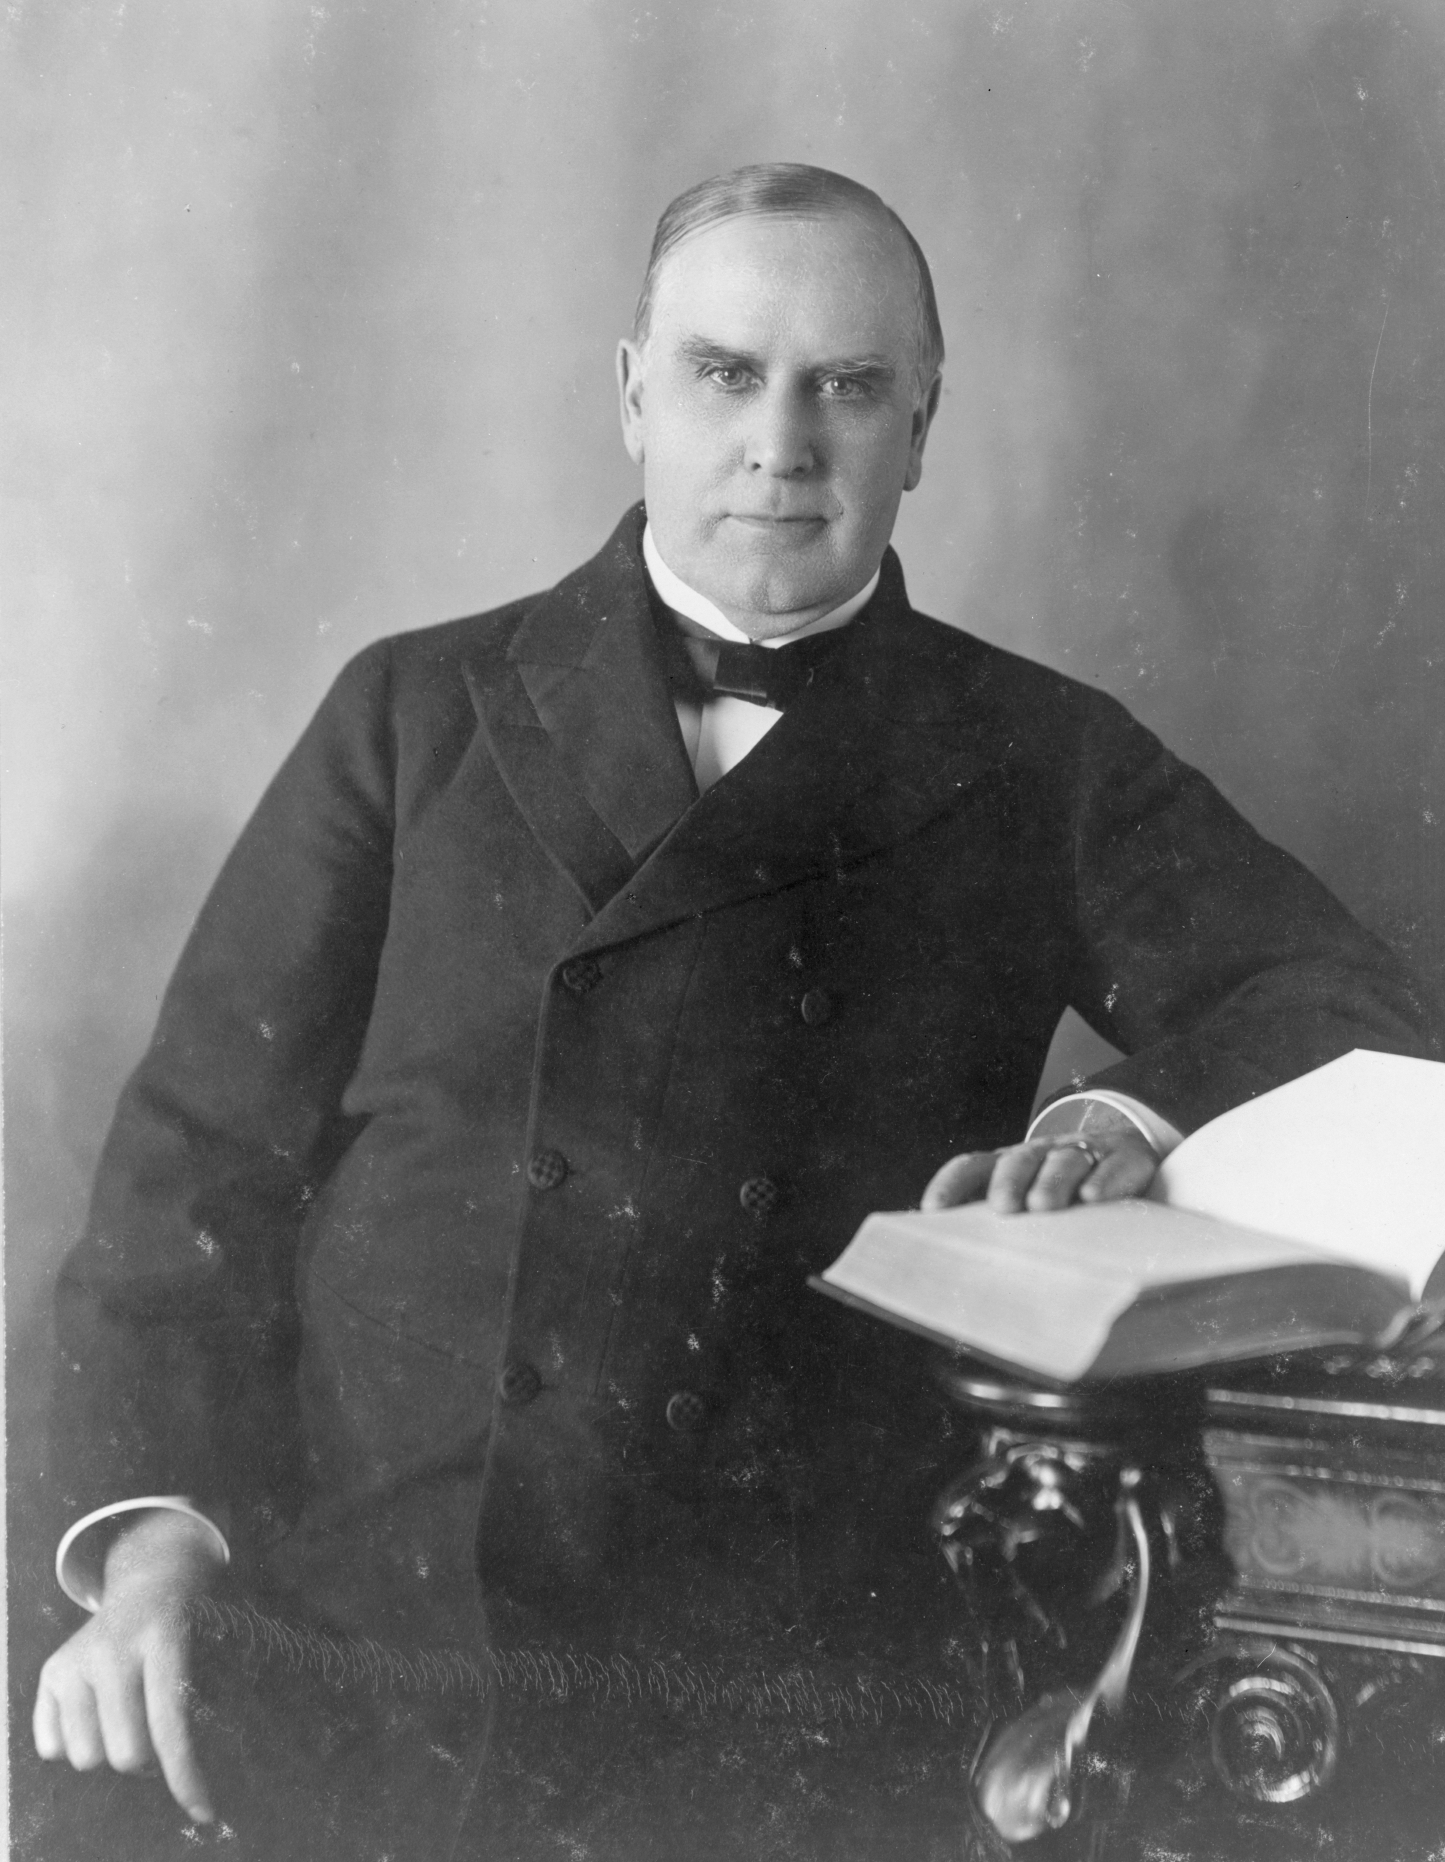 6. William McKinley
William McKinley, the 25th President of America from 1897-1901, was a war leader, who took America to war against Spain in 1898, and winning countries like Puerto Rico and the Philippines. There were many  “anti-imperialists” who opposed McKinley’s worldview and took issue wit him.